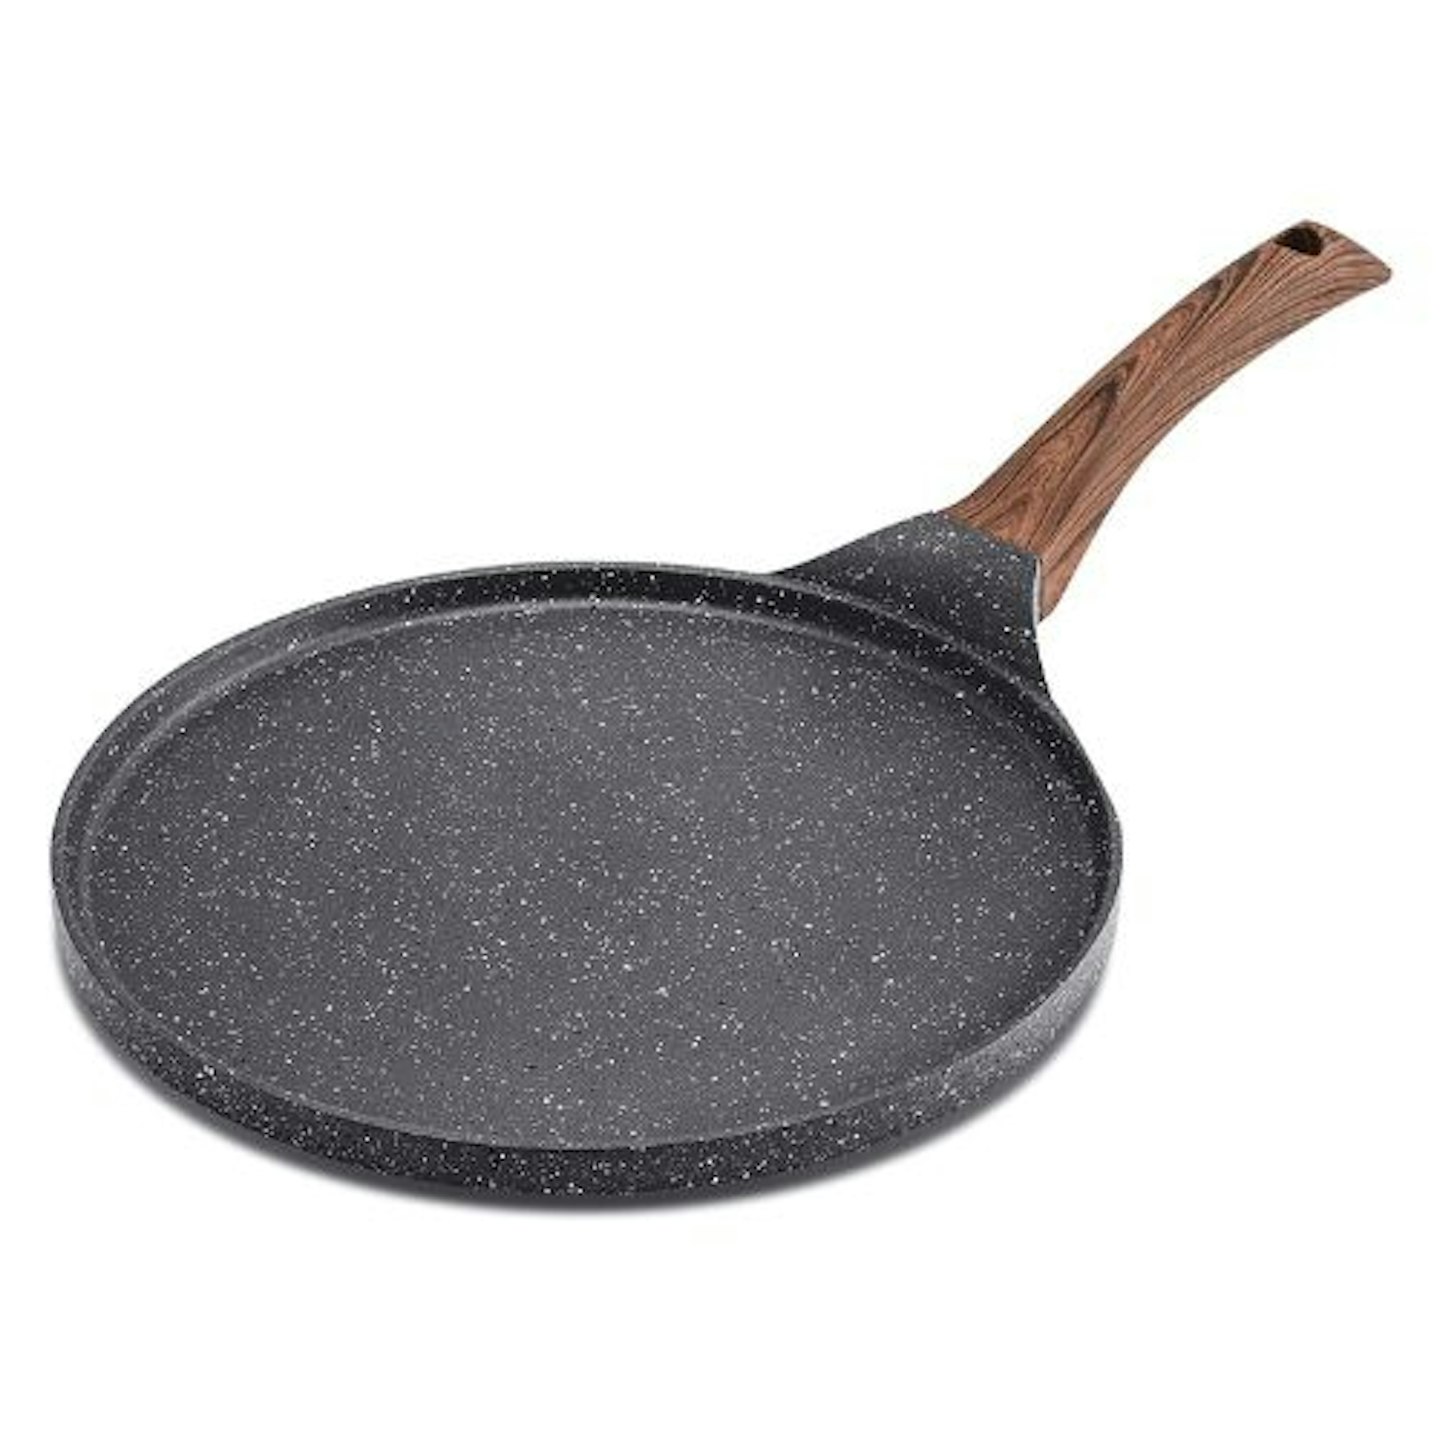 SENSARTE Non Stick Crepe Pan, Dosa Pan Die-cast Auluminium Pancake Flat Skillet Tawa Griddle 26cm with Stay-Cool Handle, Induction Compatible, PFOA Free